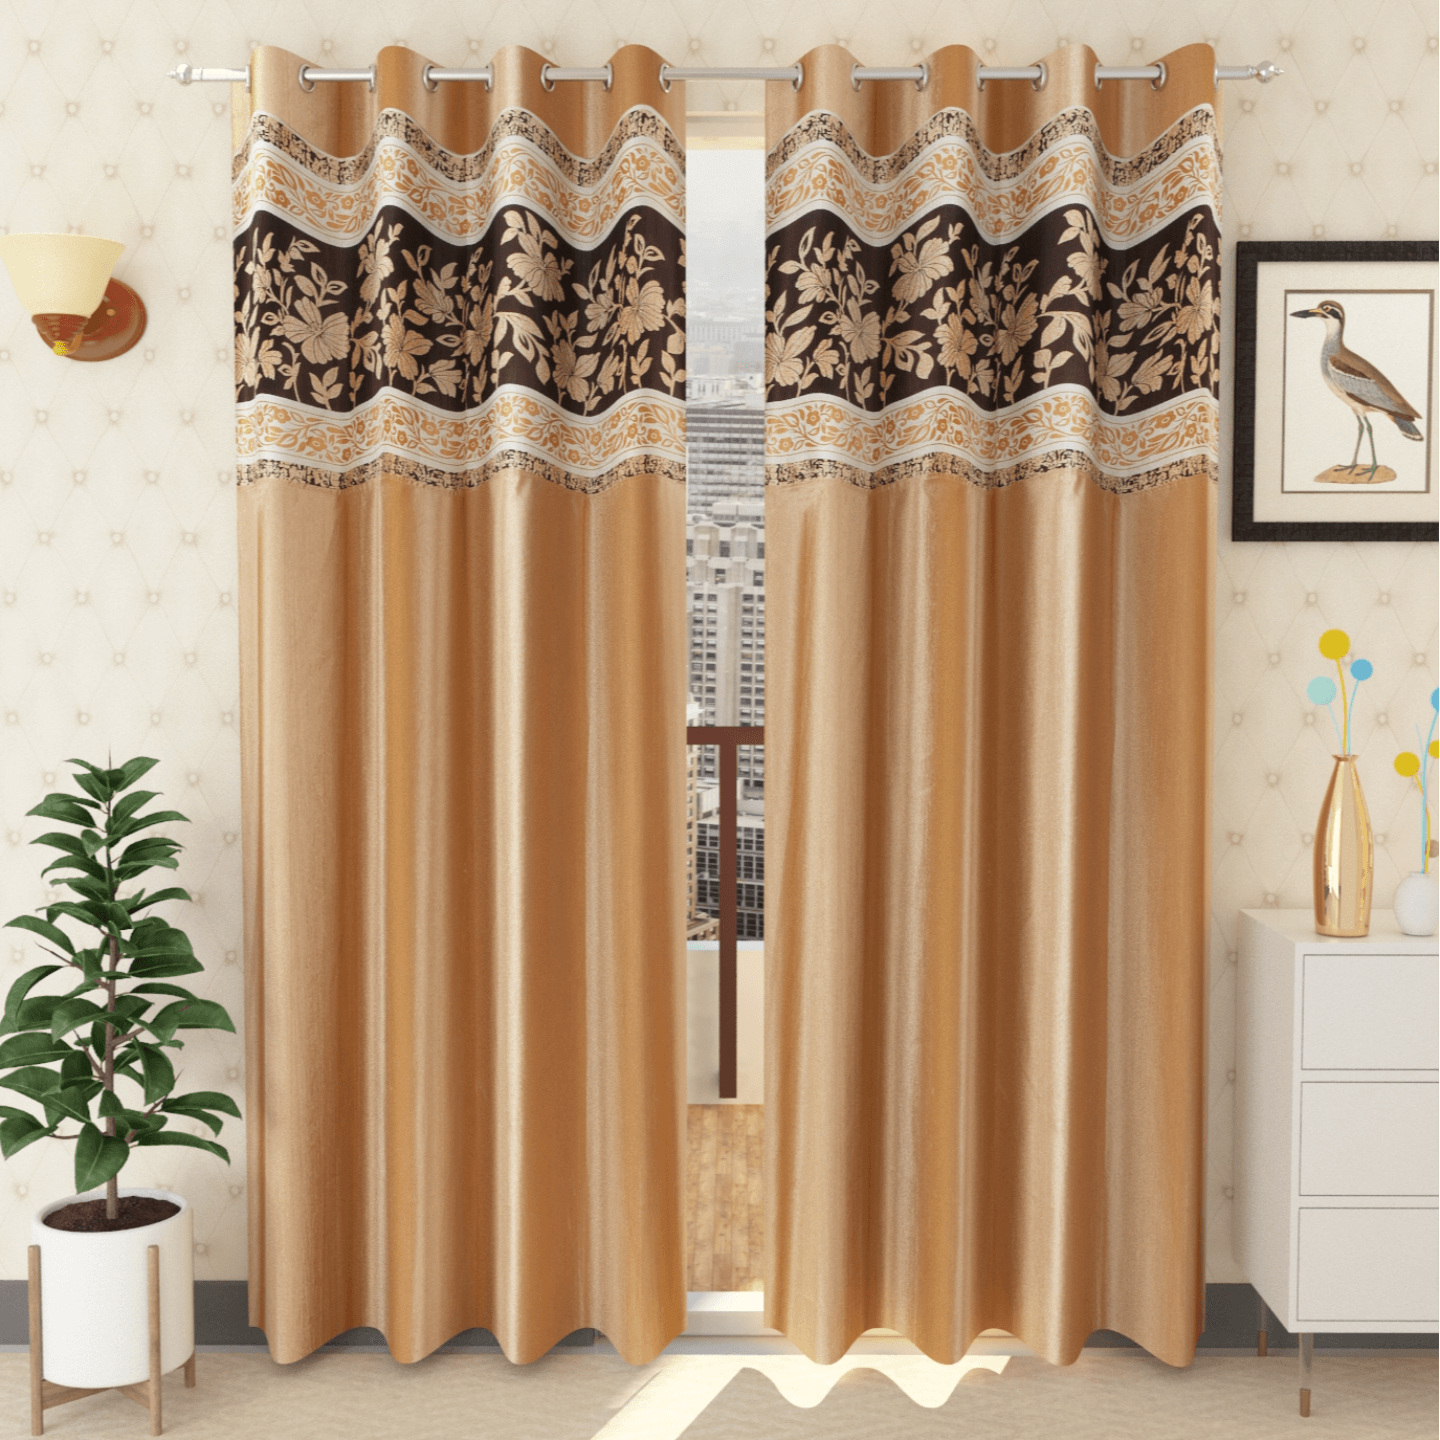 Handtex Home Patchwork curtain for door 9 feet set of 2pc Gold color